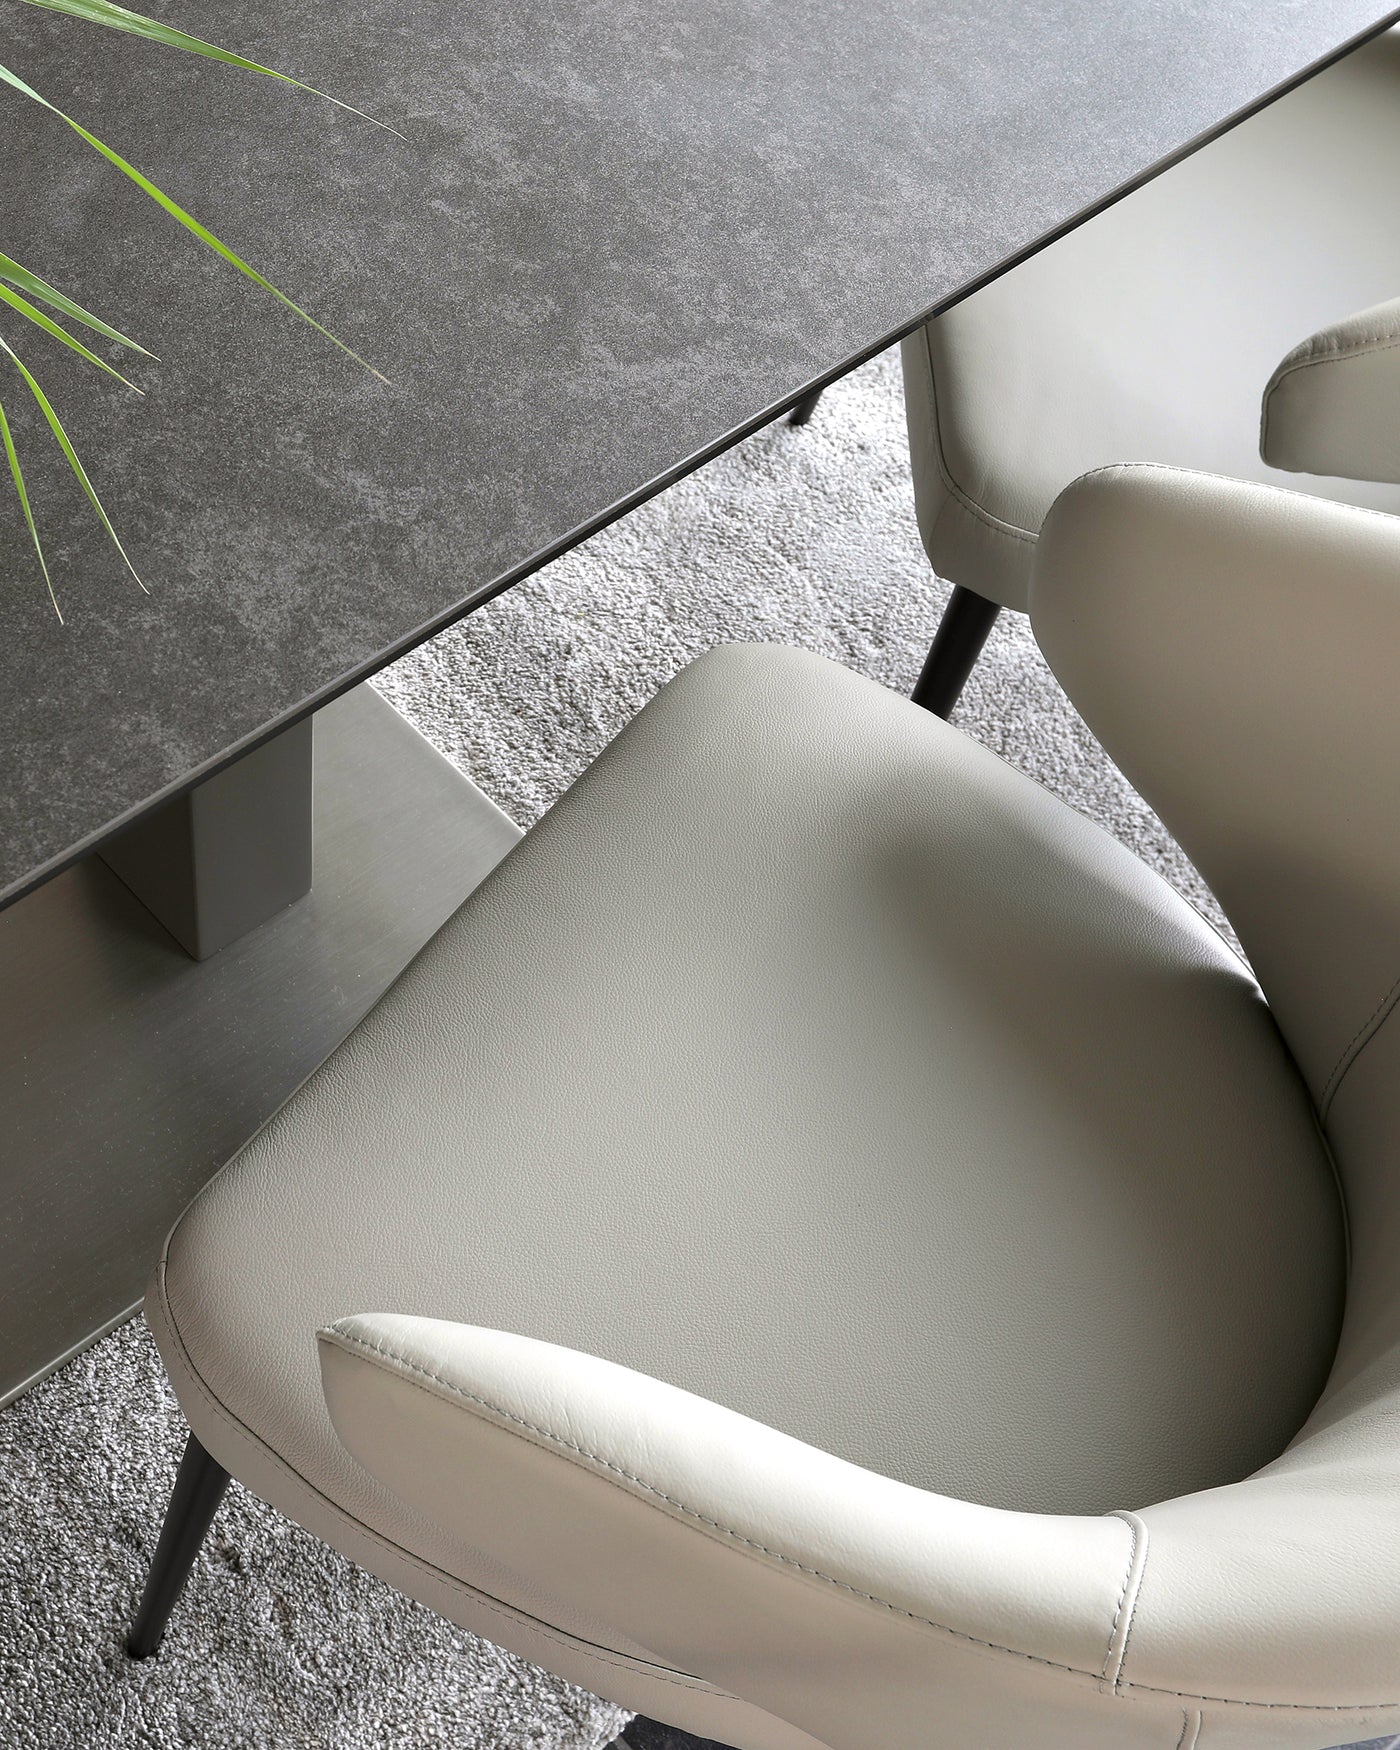 Modern stone grey dining table with sleek metallic legs paired with elegant light grey upholstered dining chairs featuring a curved backrest and black metallic legs. The setting is complemented by a plush grey area rug underneath.